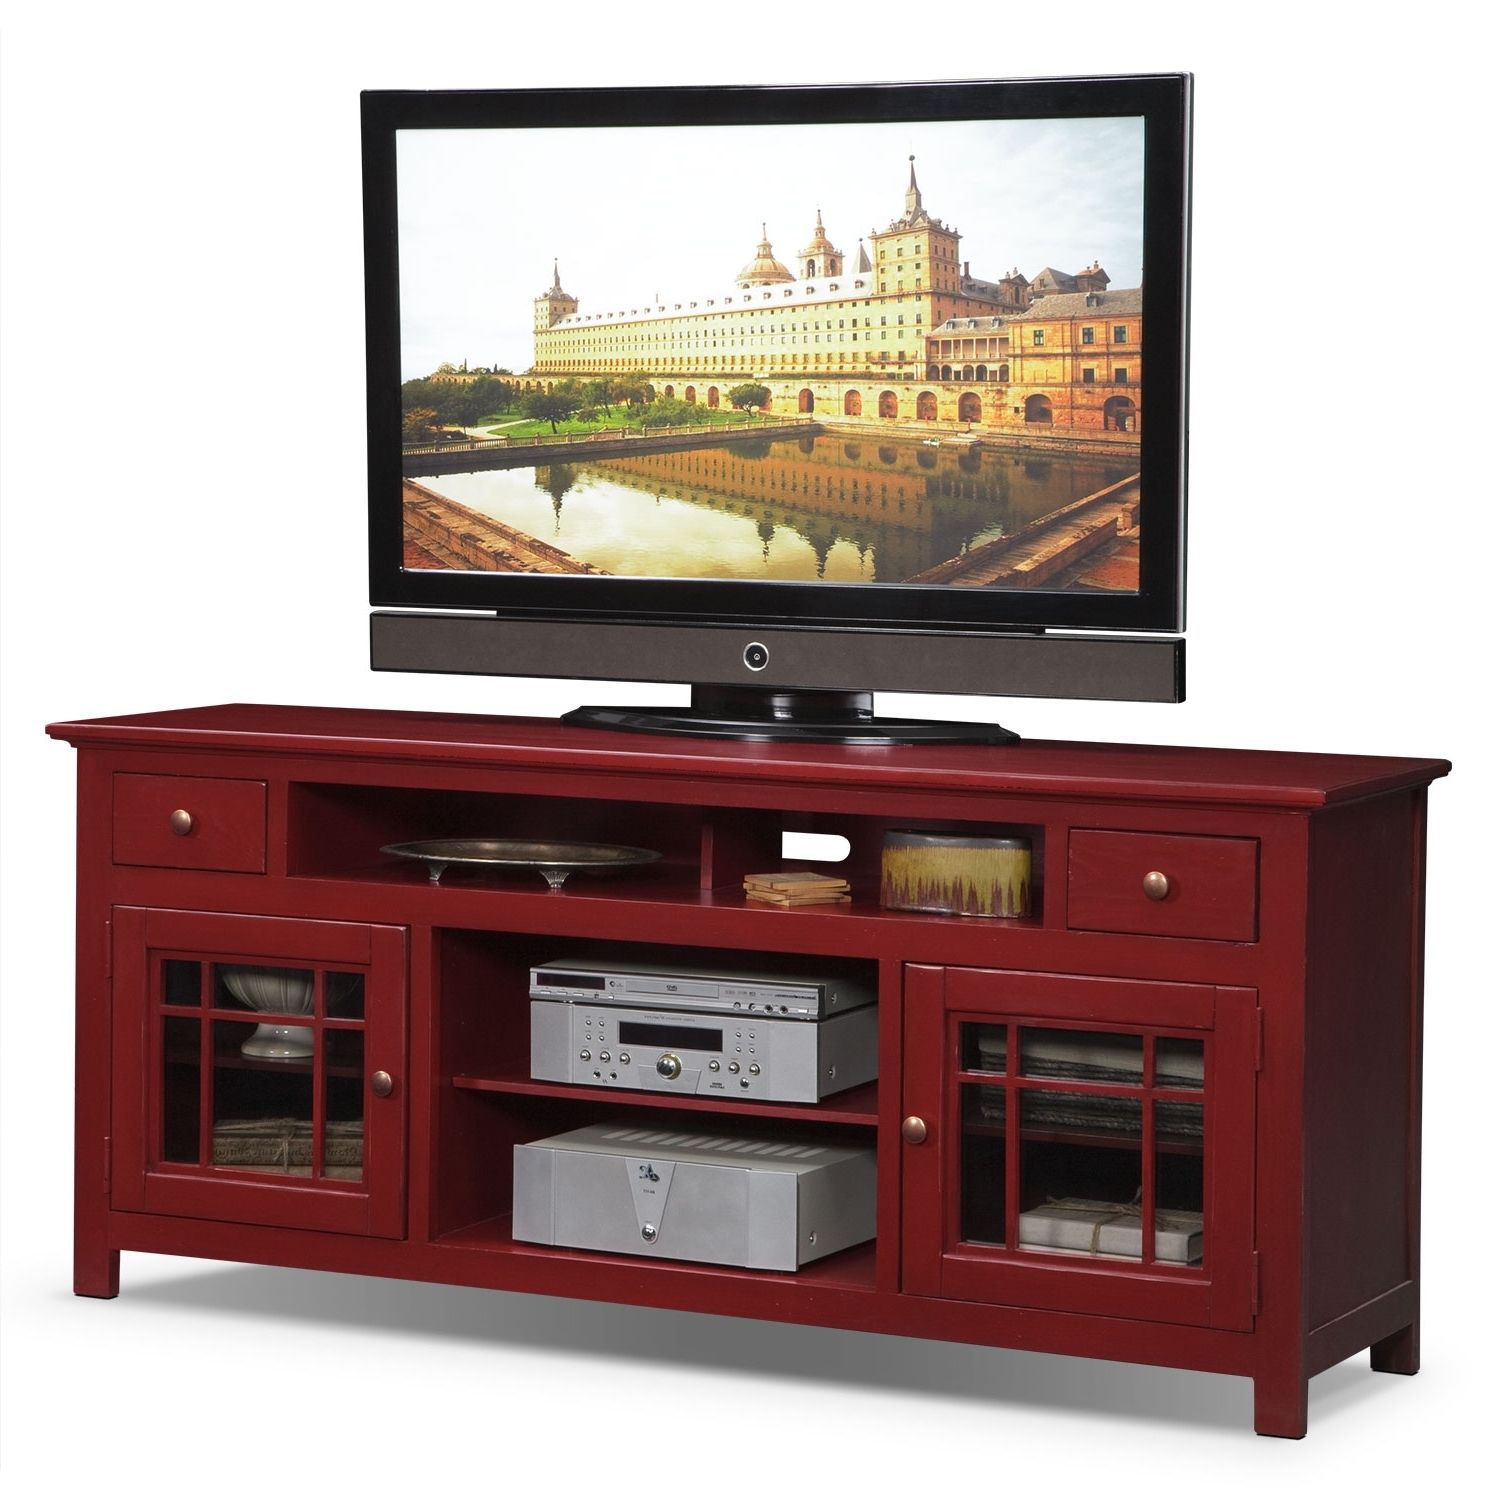 How to Choose a Red TV Stand